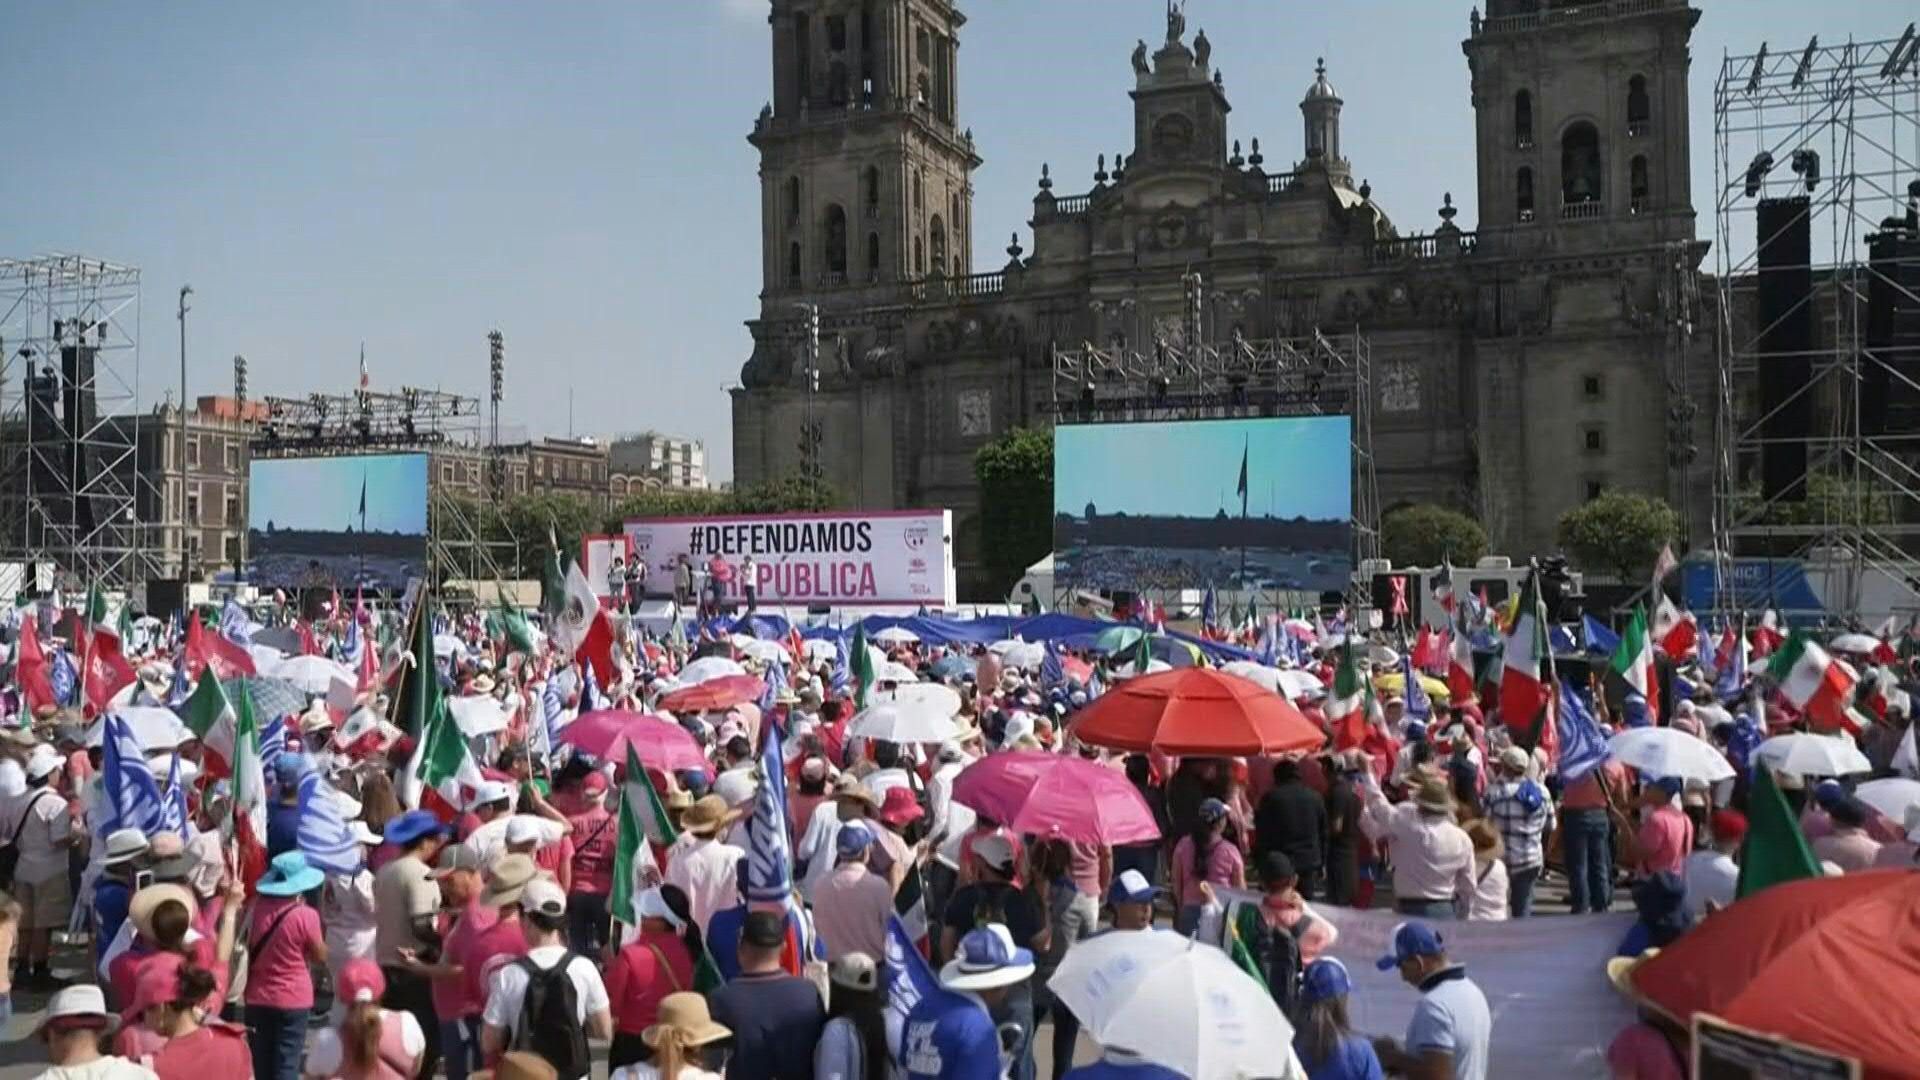 Opposition protesters gather in Mexico City ahead of rally